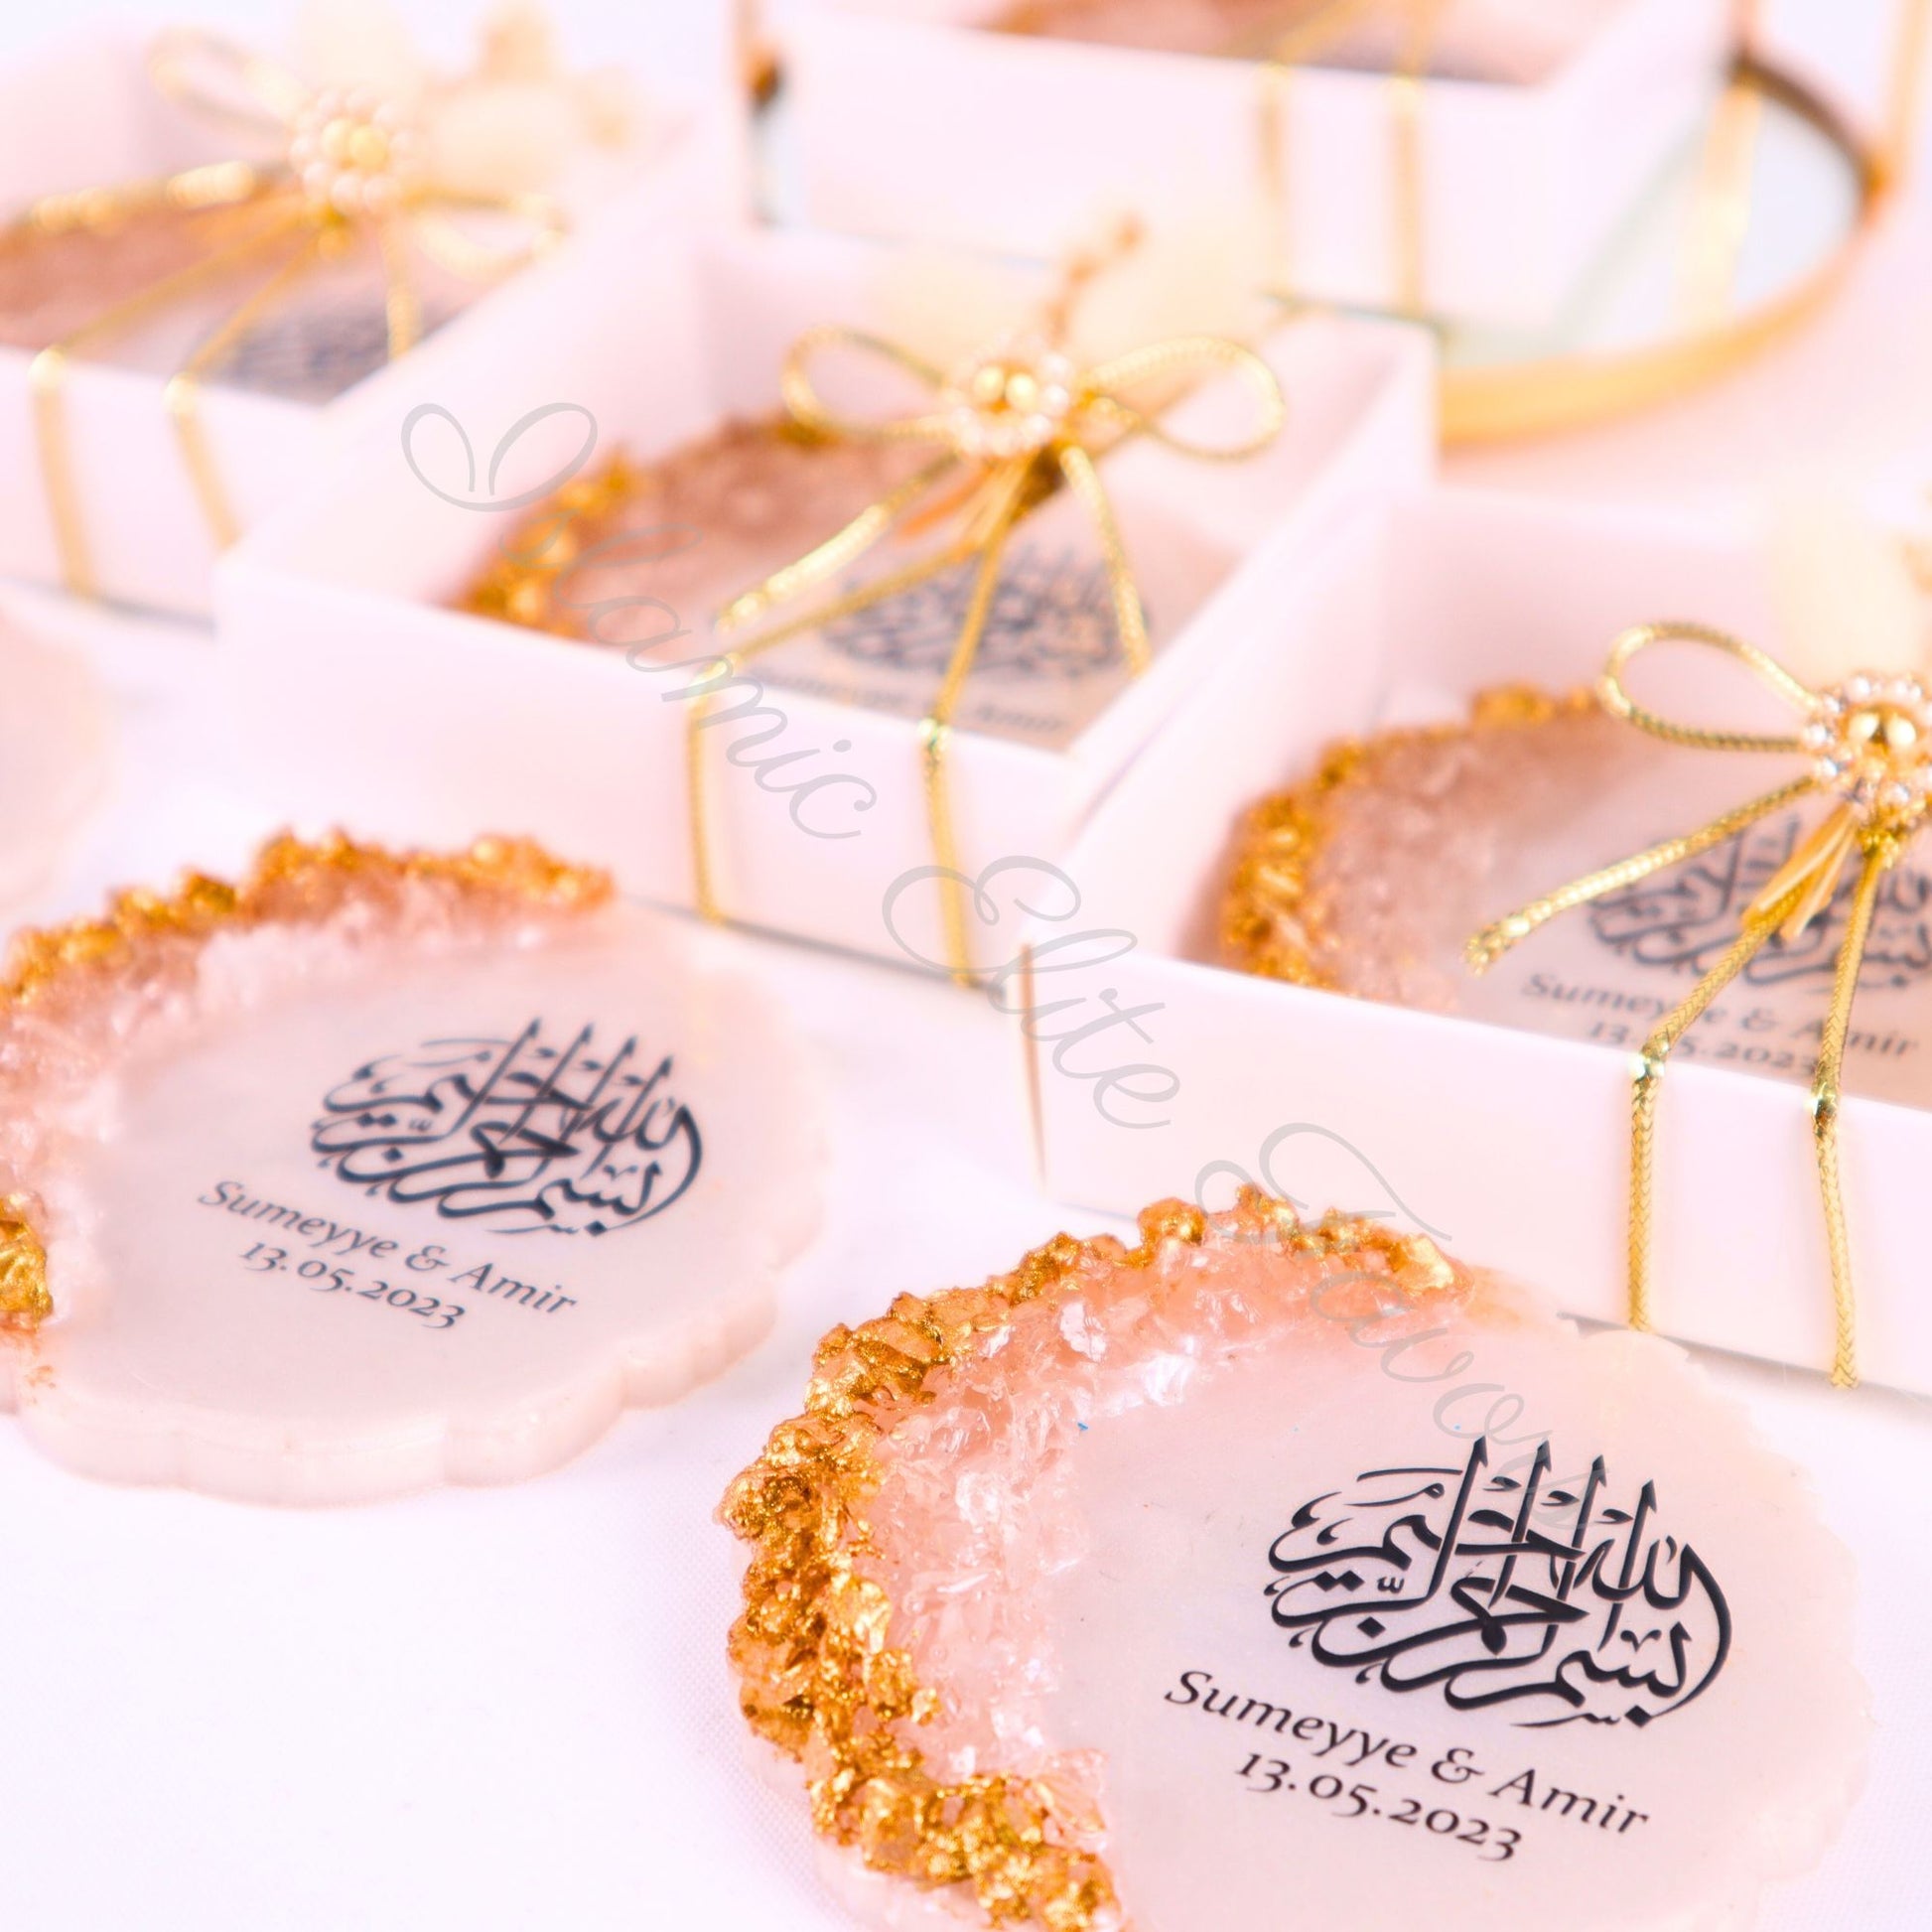 Personalized Wedding Favor Epoxy Bismillah Magnet in White Gift Box - Islamic Elite Favors is a handmade gift shop offering a wide variety of unique and personalized gifts for all occasions. Whether you're looking for the perfect Ramadan, Eid, Hajj, wedding gift or something special for a birthday, baby shower or anniversary, we have something for everyone. High quality, made with love.